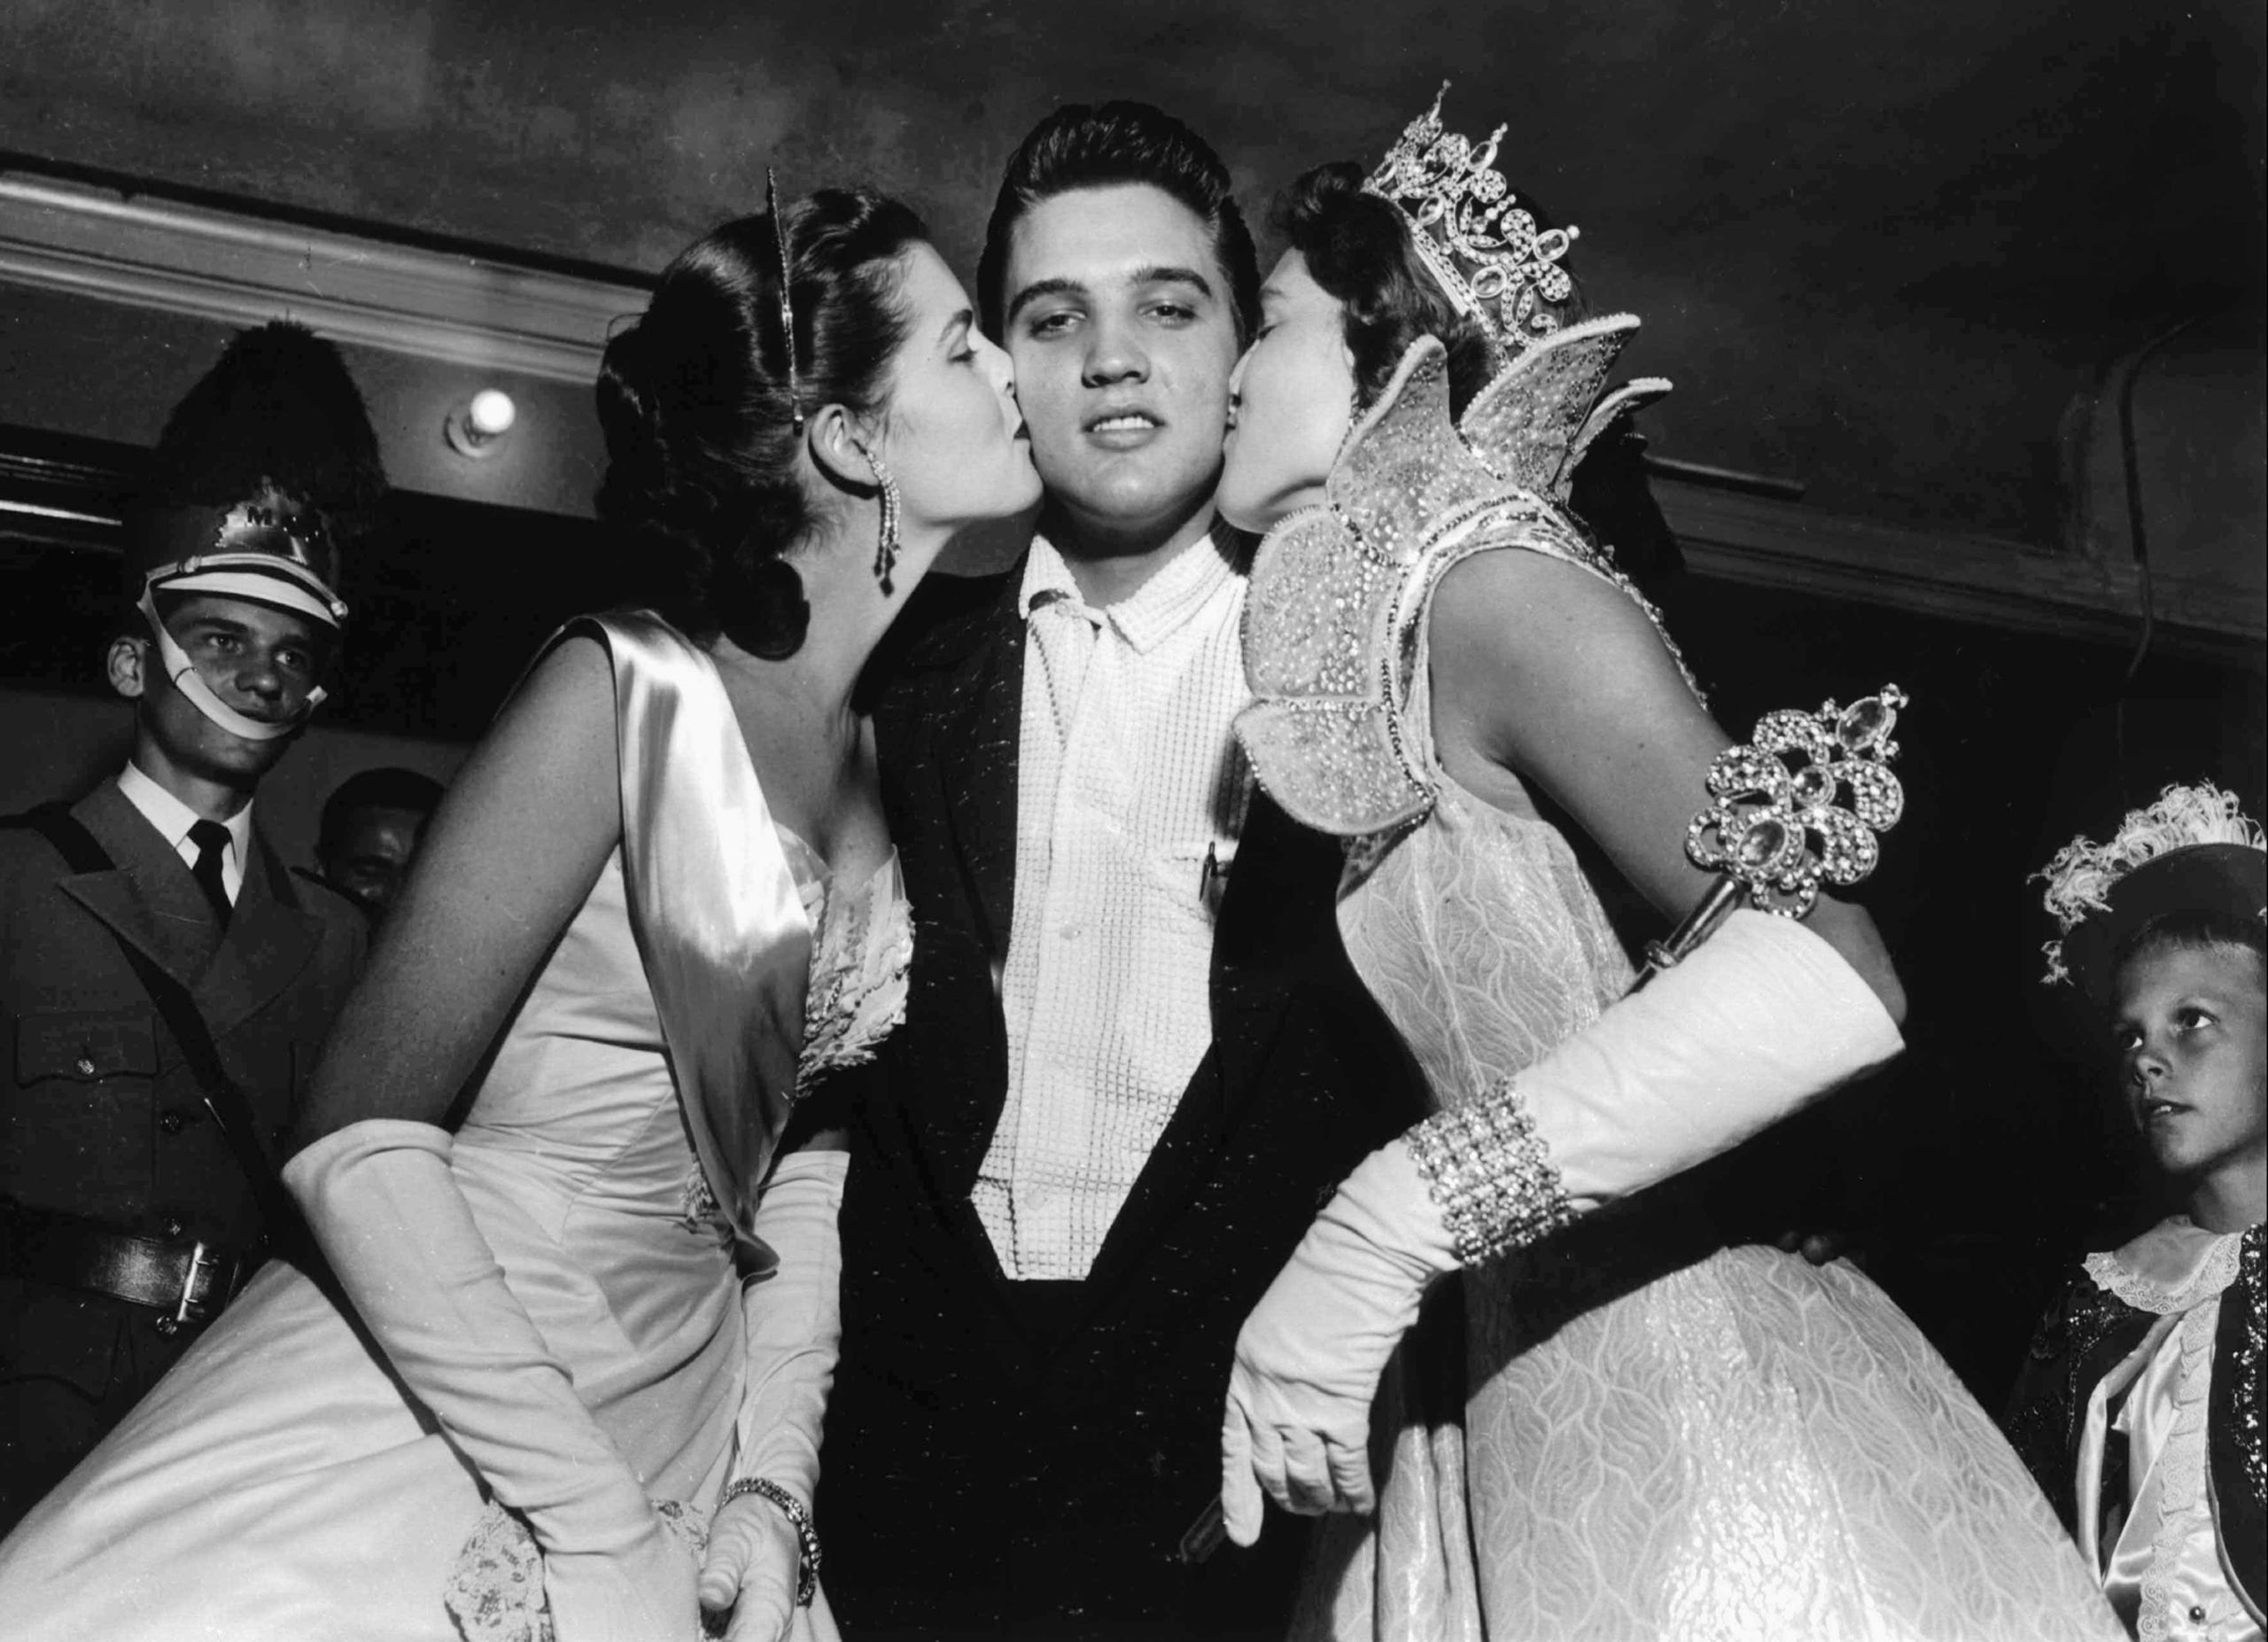 Elvis Presley is kissed on the cheek by Maid of Cotton Patricia Cowden and Memphis Cotton Carnival Queen Clare Mallory just before the rock ‘n’ roll singer walked on stage before a packed Ellis Auditorium audience on May 15, 1956.